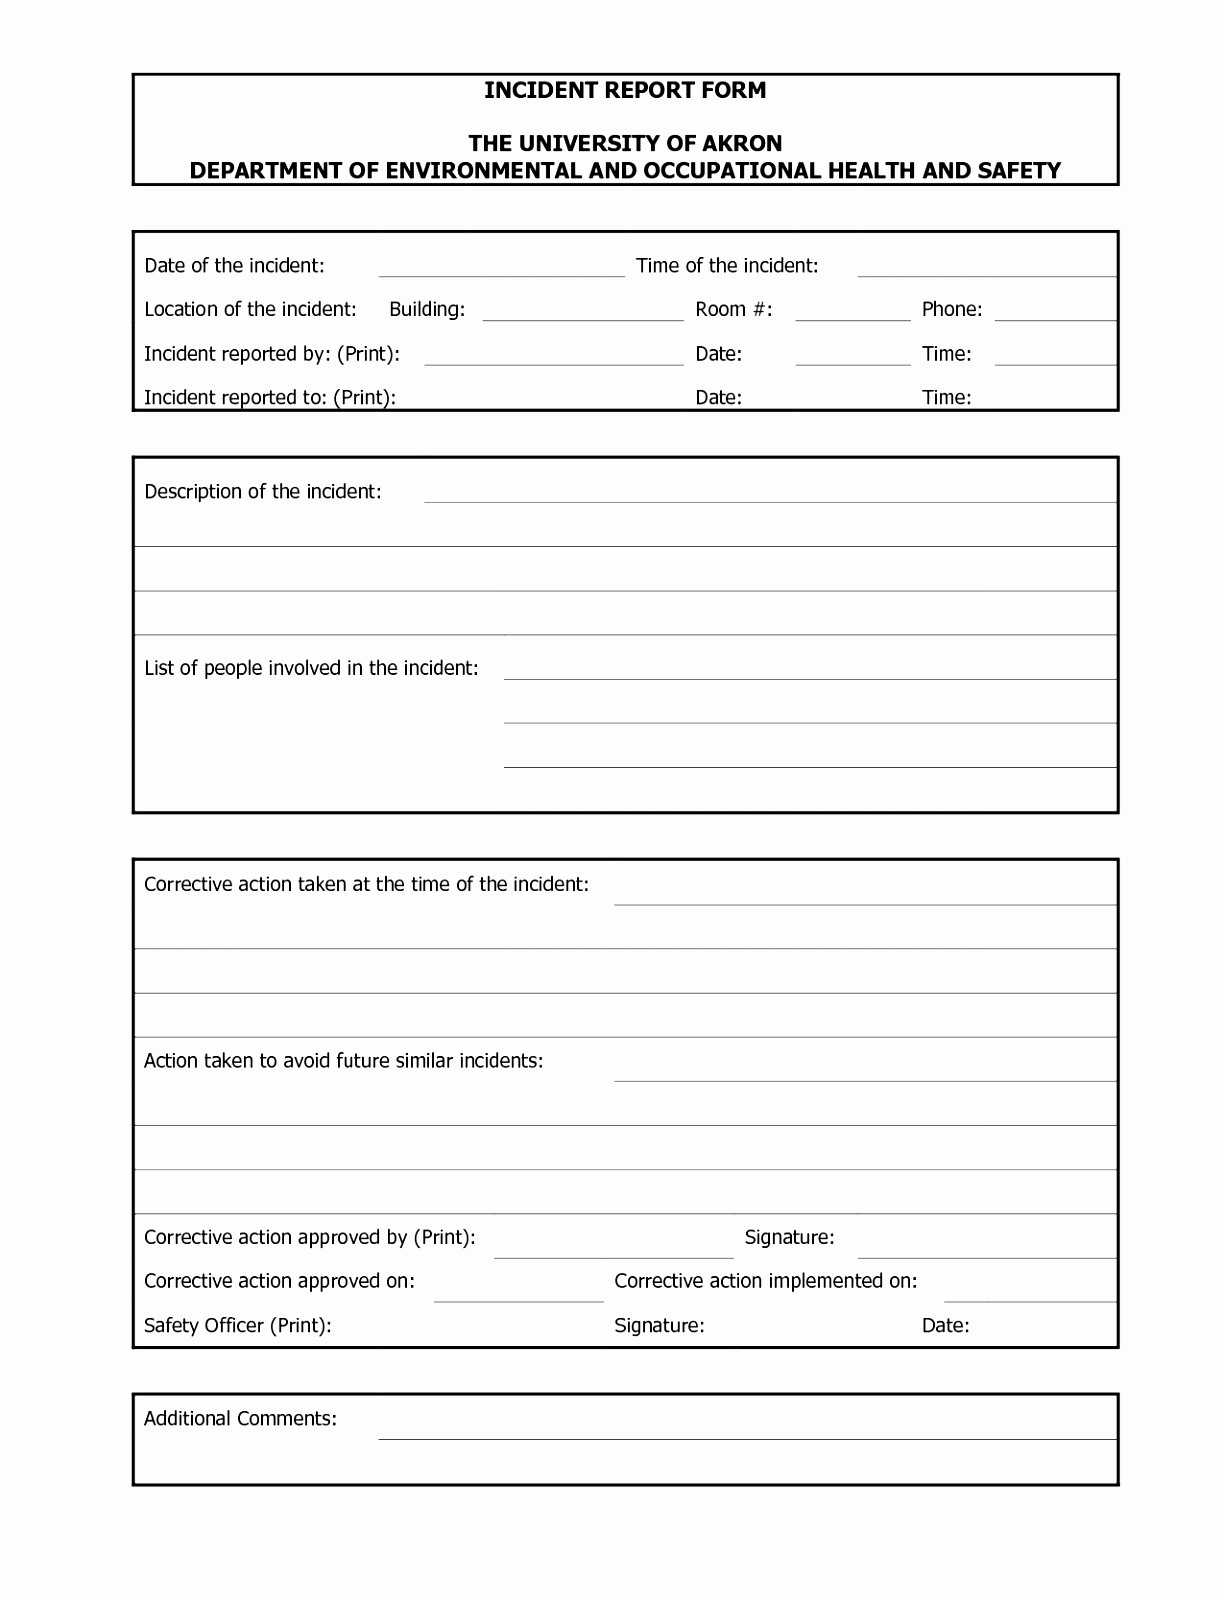 Automobile Accident Report Form Template Elegant Incident Throughout Health And Safety Incident Report Form Template